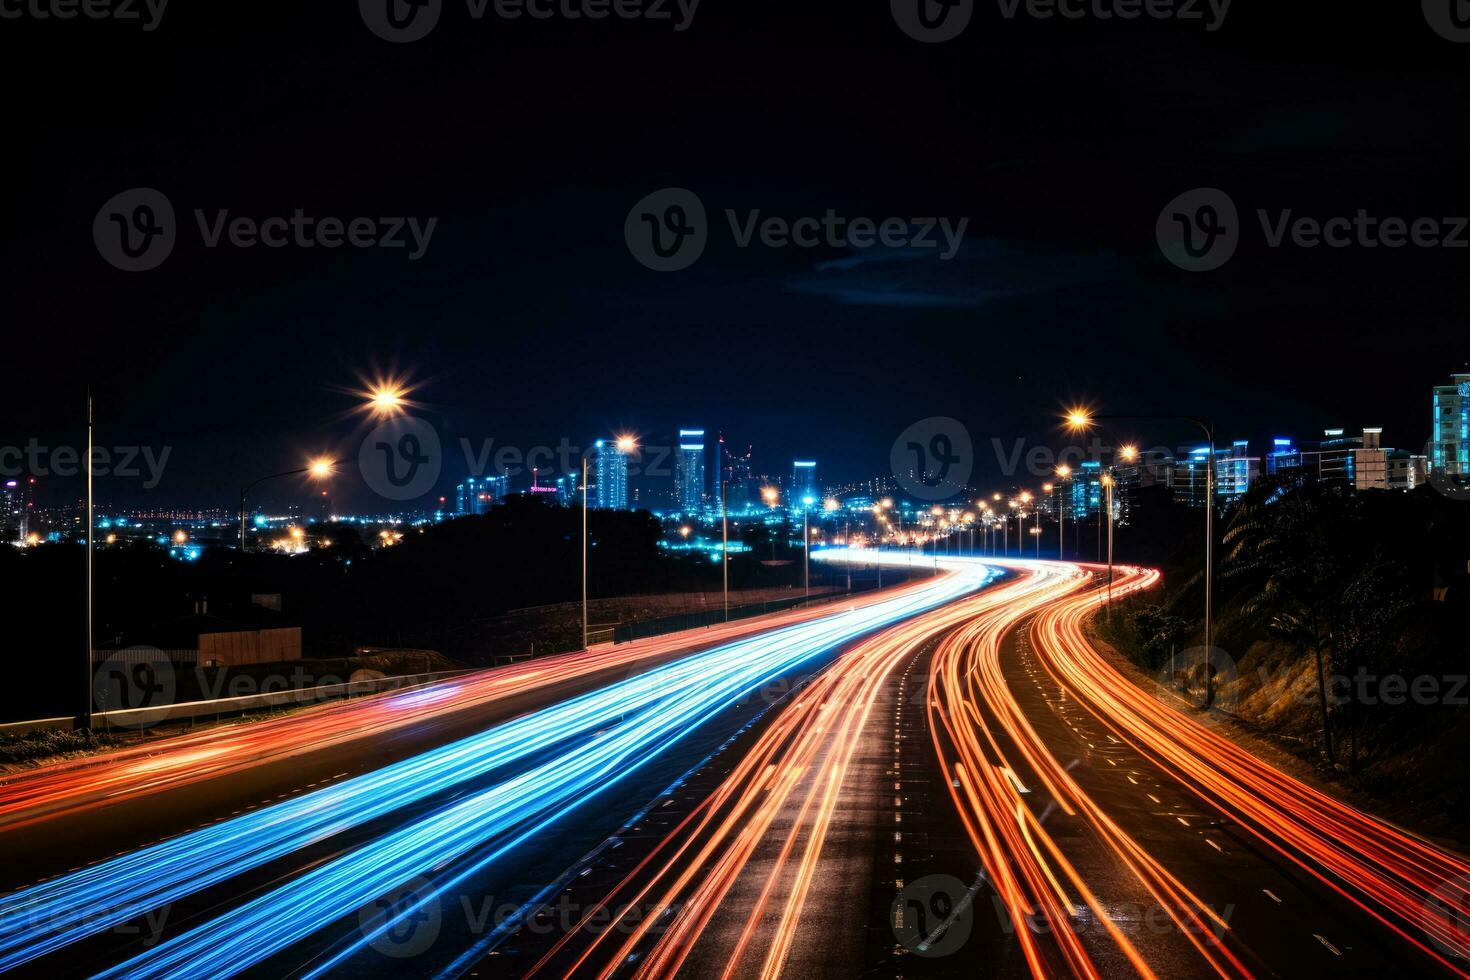 A night scene of a highway captured with long exposure photo